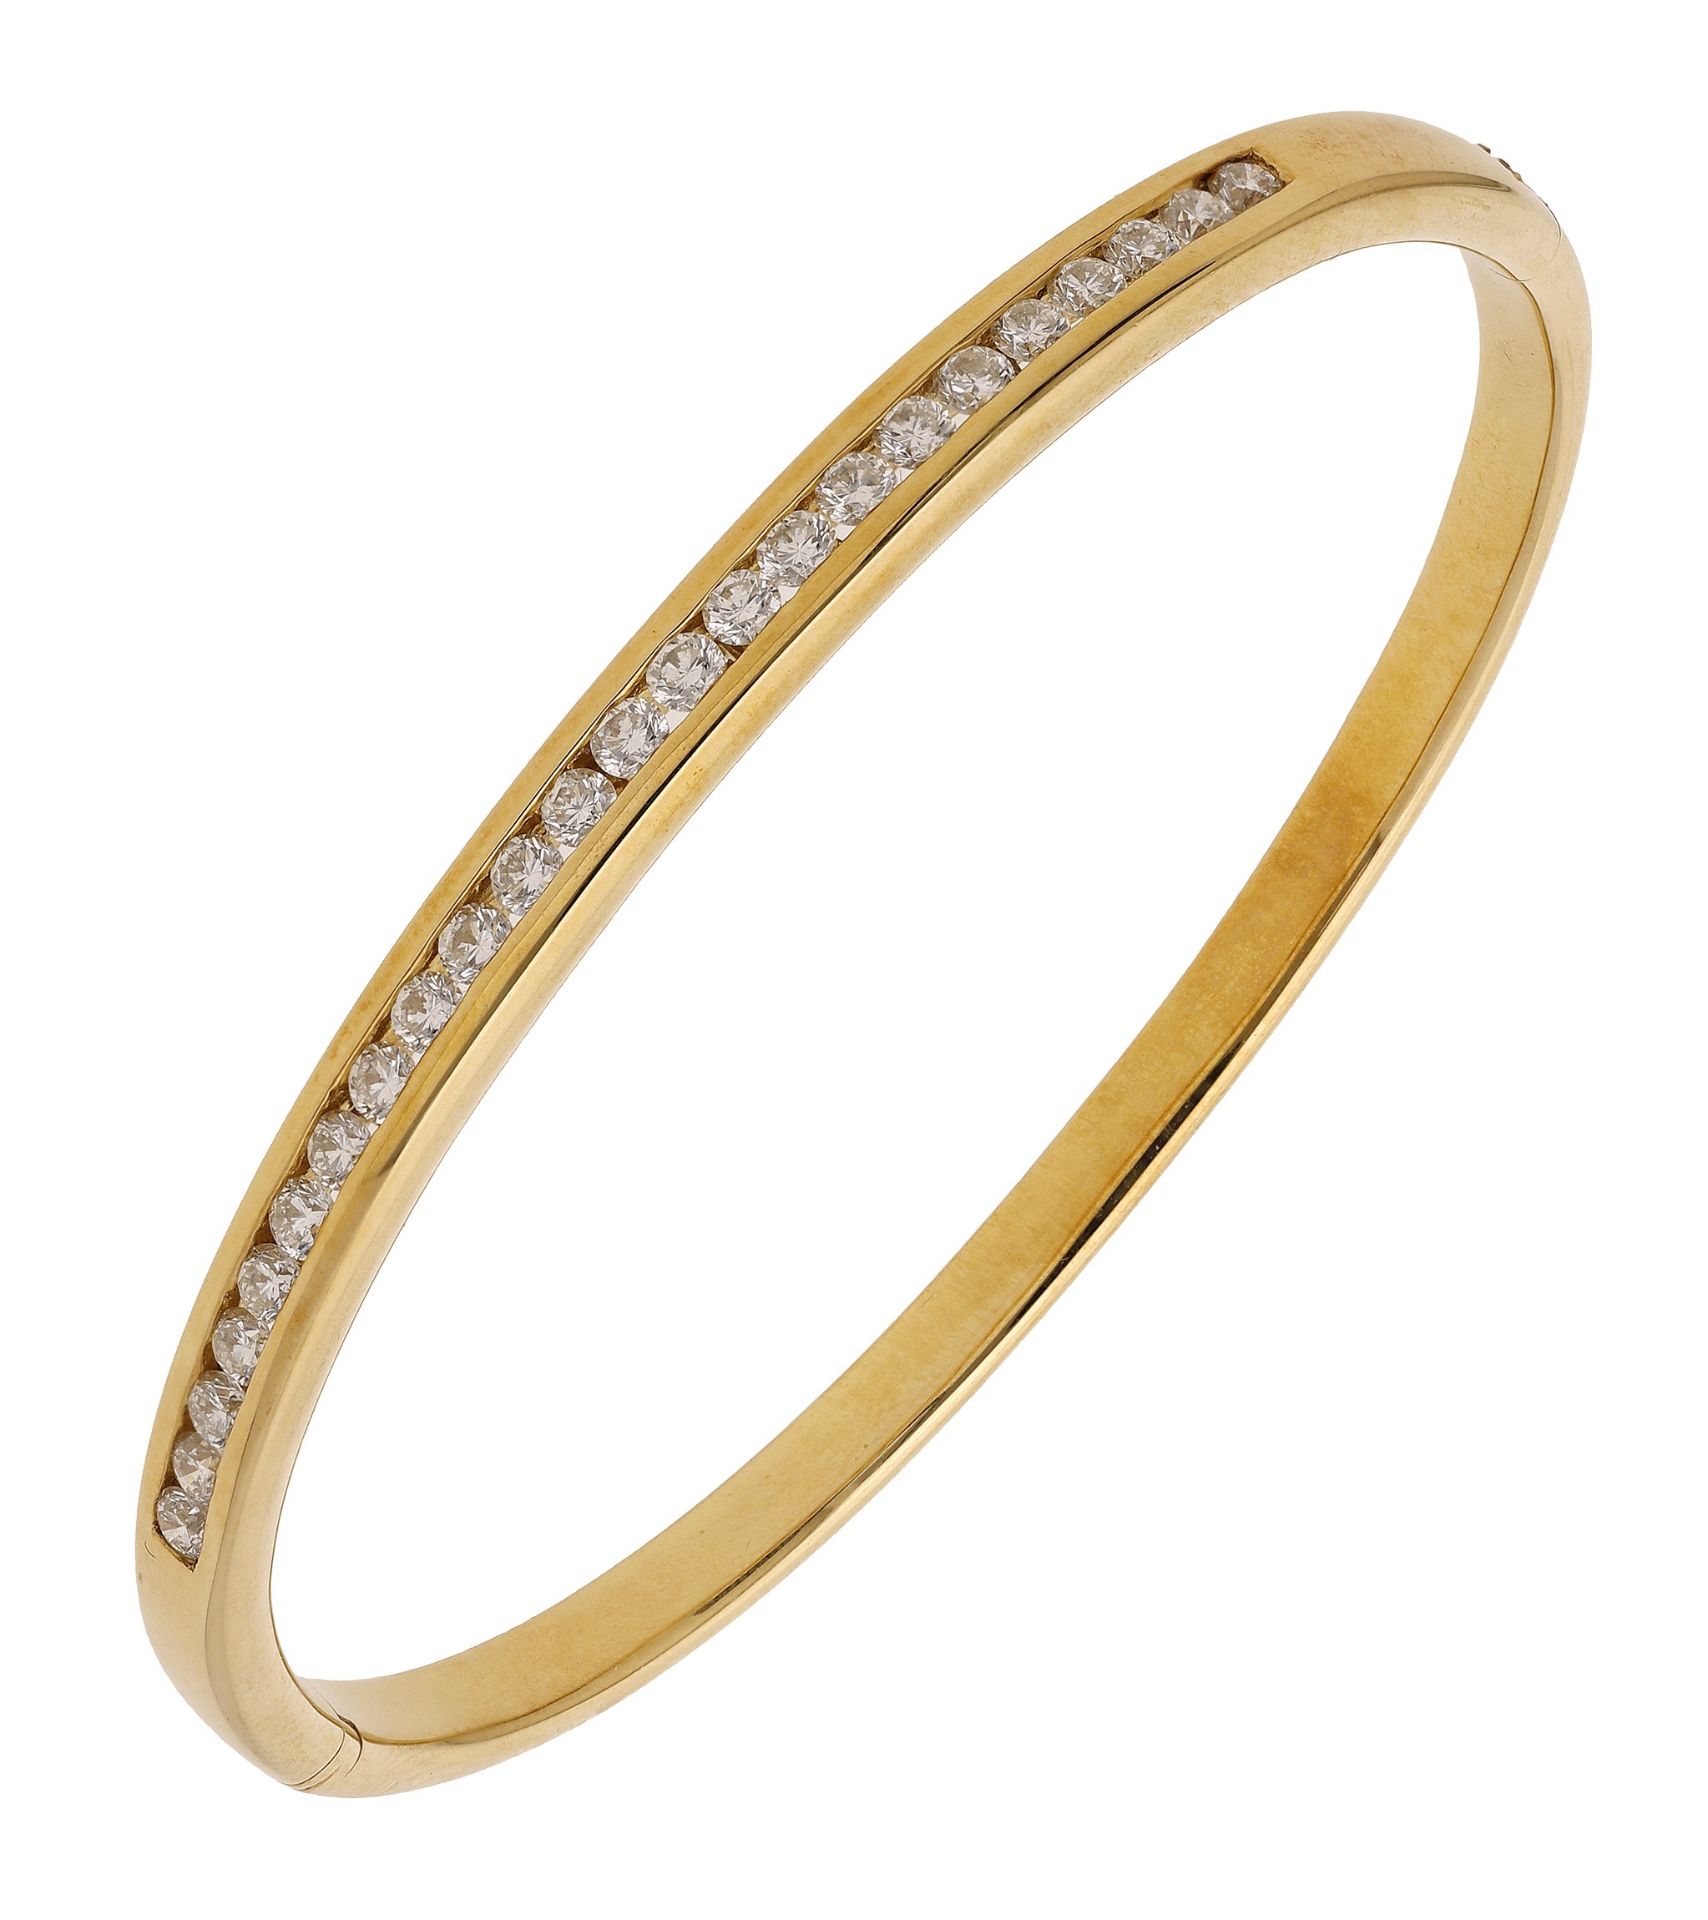 An 18ct gold and diamond set hinged bangle, channel-set to the front with brilliant-cut diam...